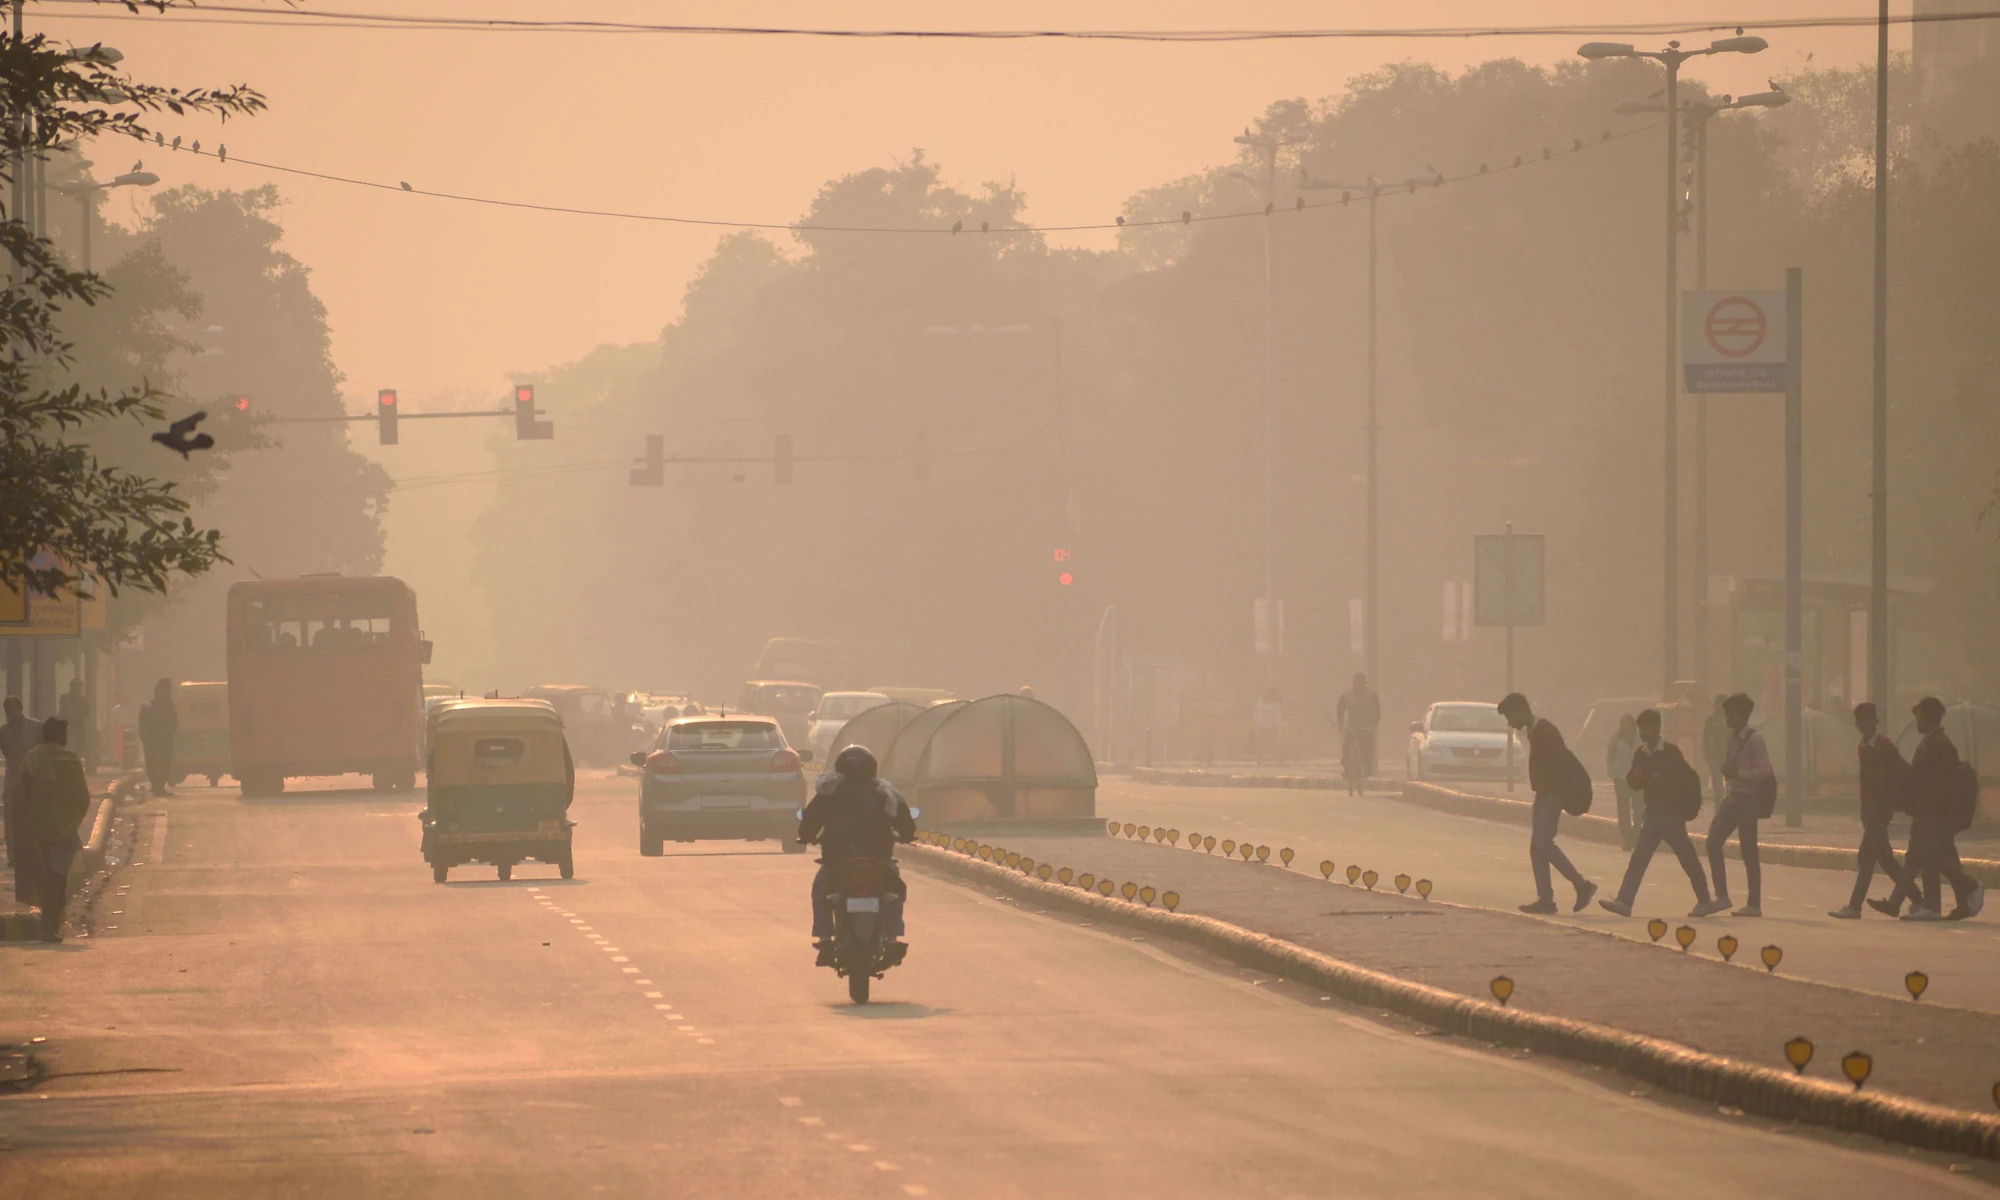 Vehicles and people moving in the streets amidst heavy smog. Photo: Shutterstock